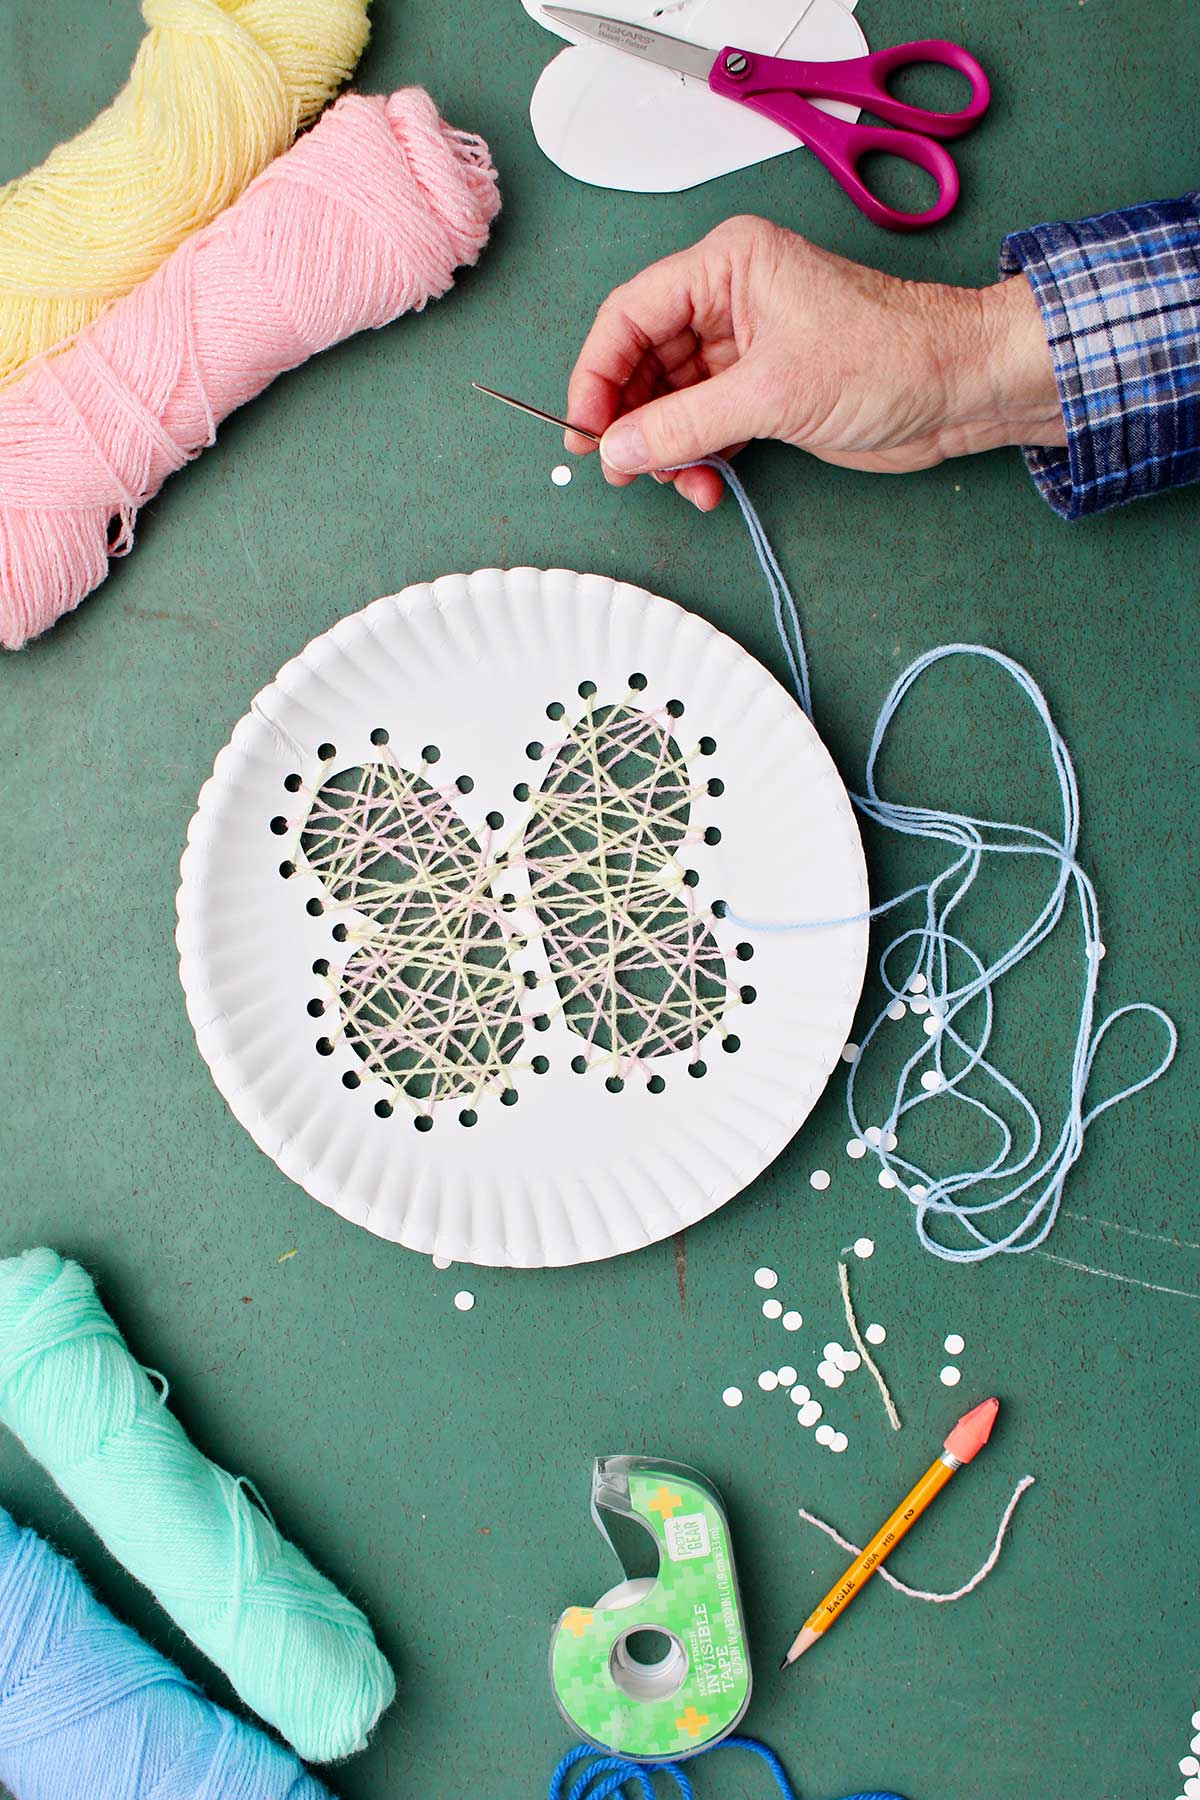 Hand using darning needle and yard to thread through butterfly cut out to make string art project with other supplies near by.